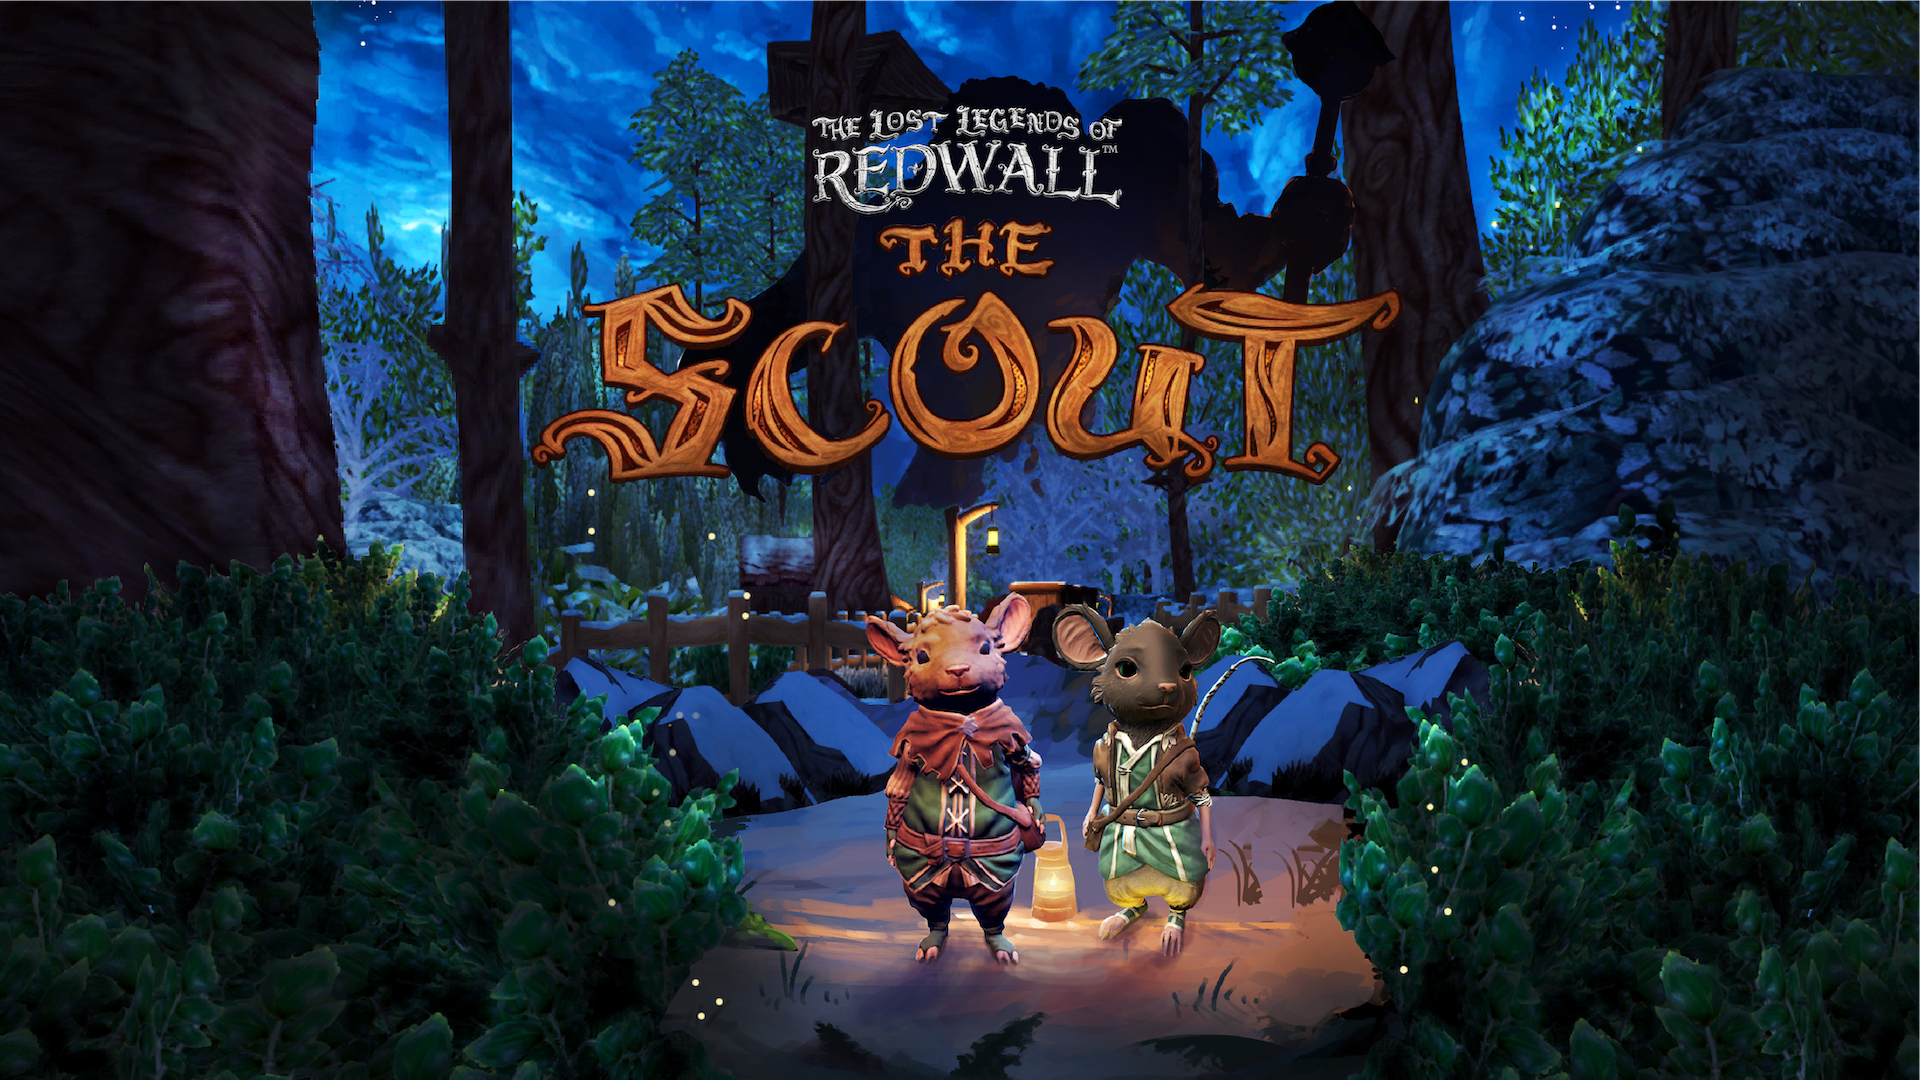 The lost legends of redwall. Redwall Abbey игра. Воин Рэдволла игра. The Lost Legends of Redwall обложка.